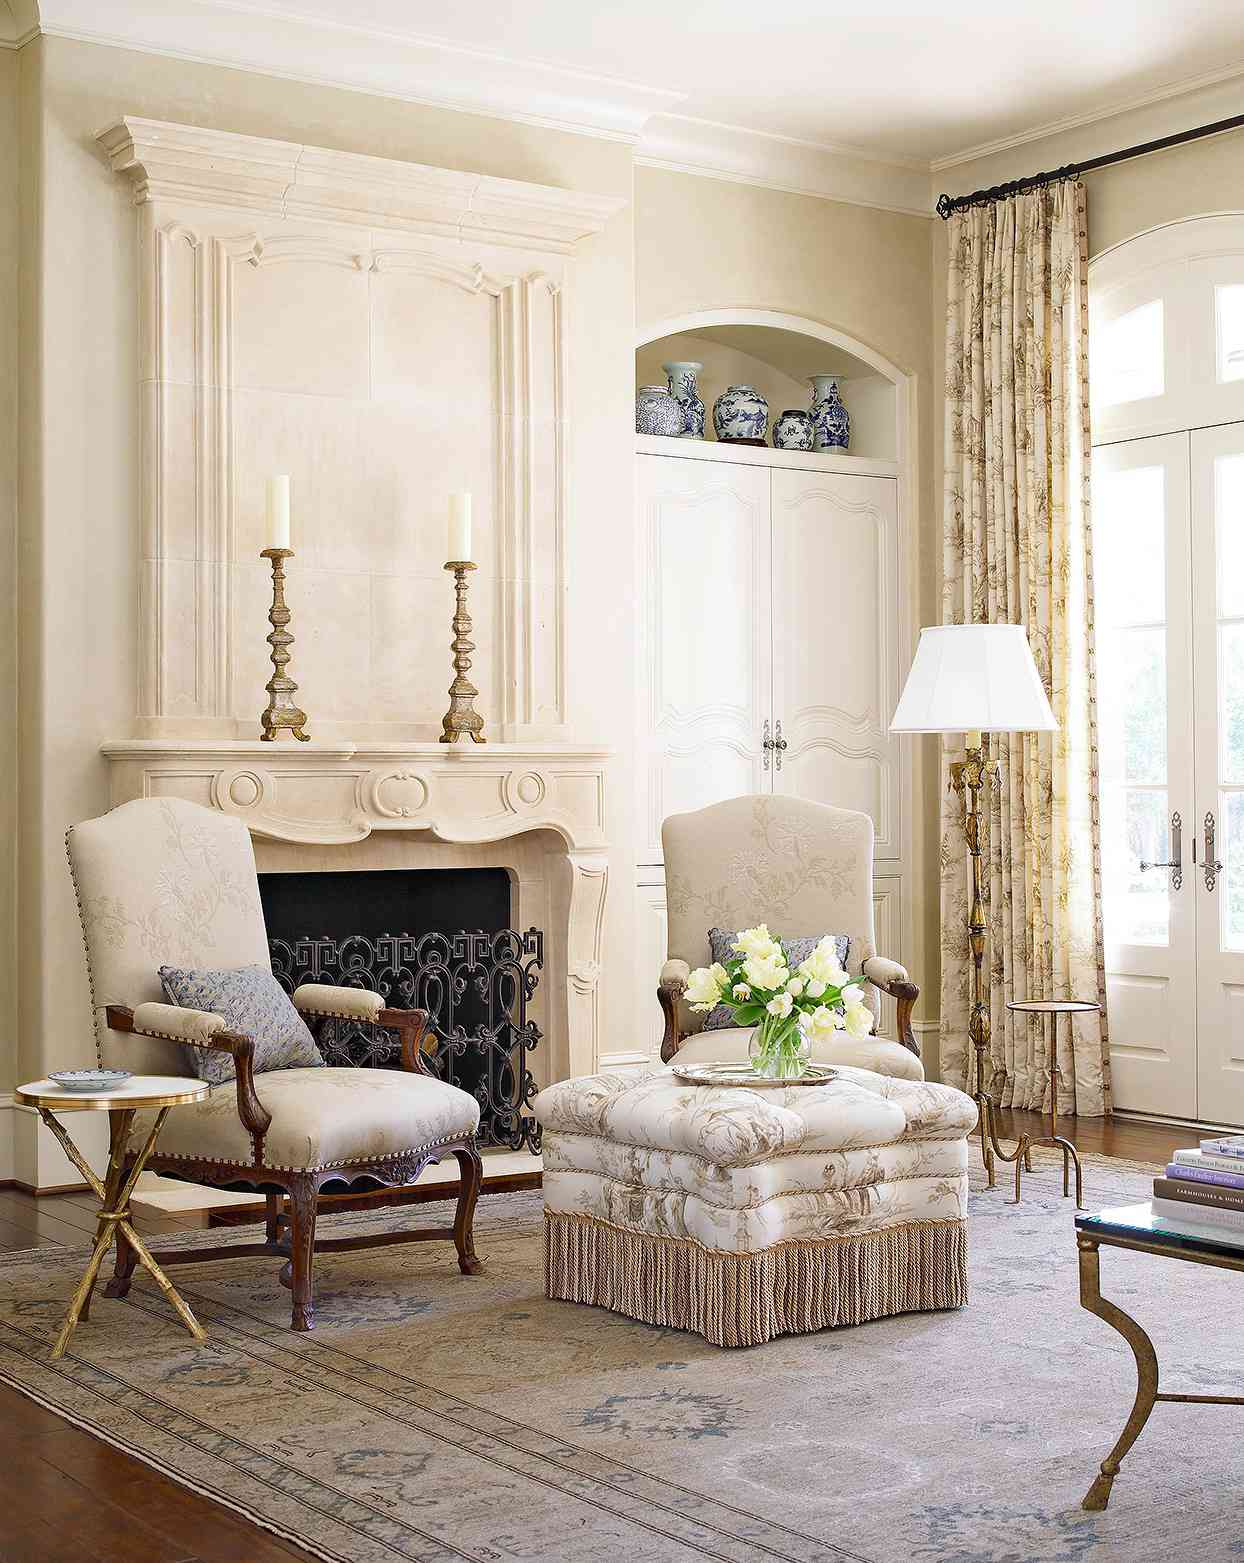 20 Charming French Country Decorating Ideas for Every Room ...